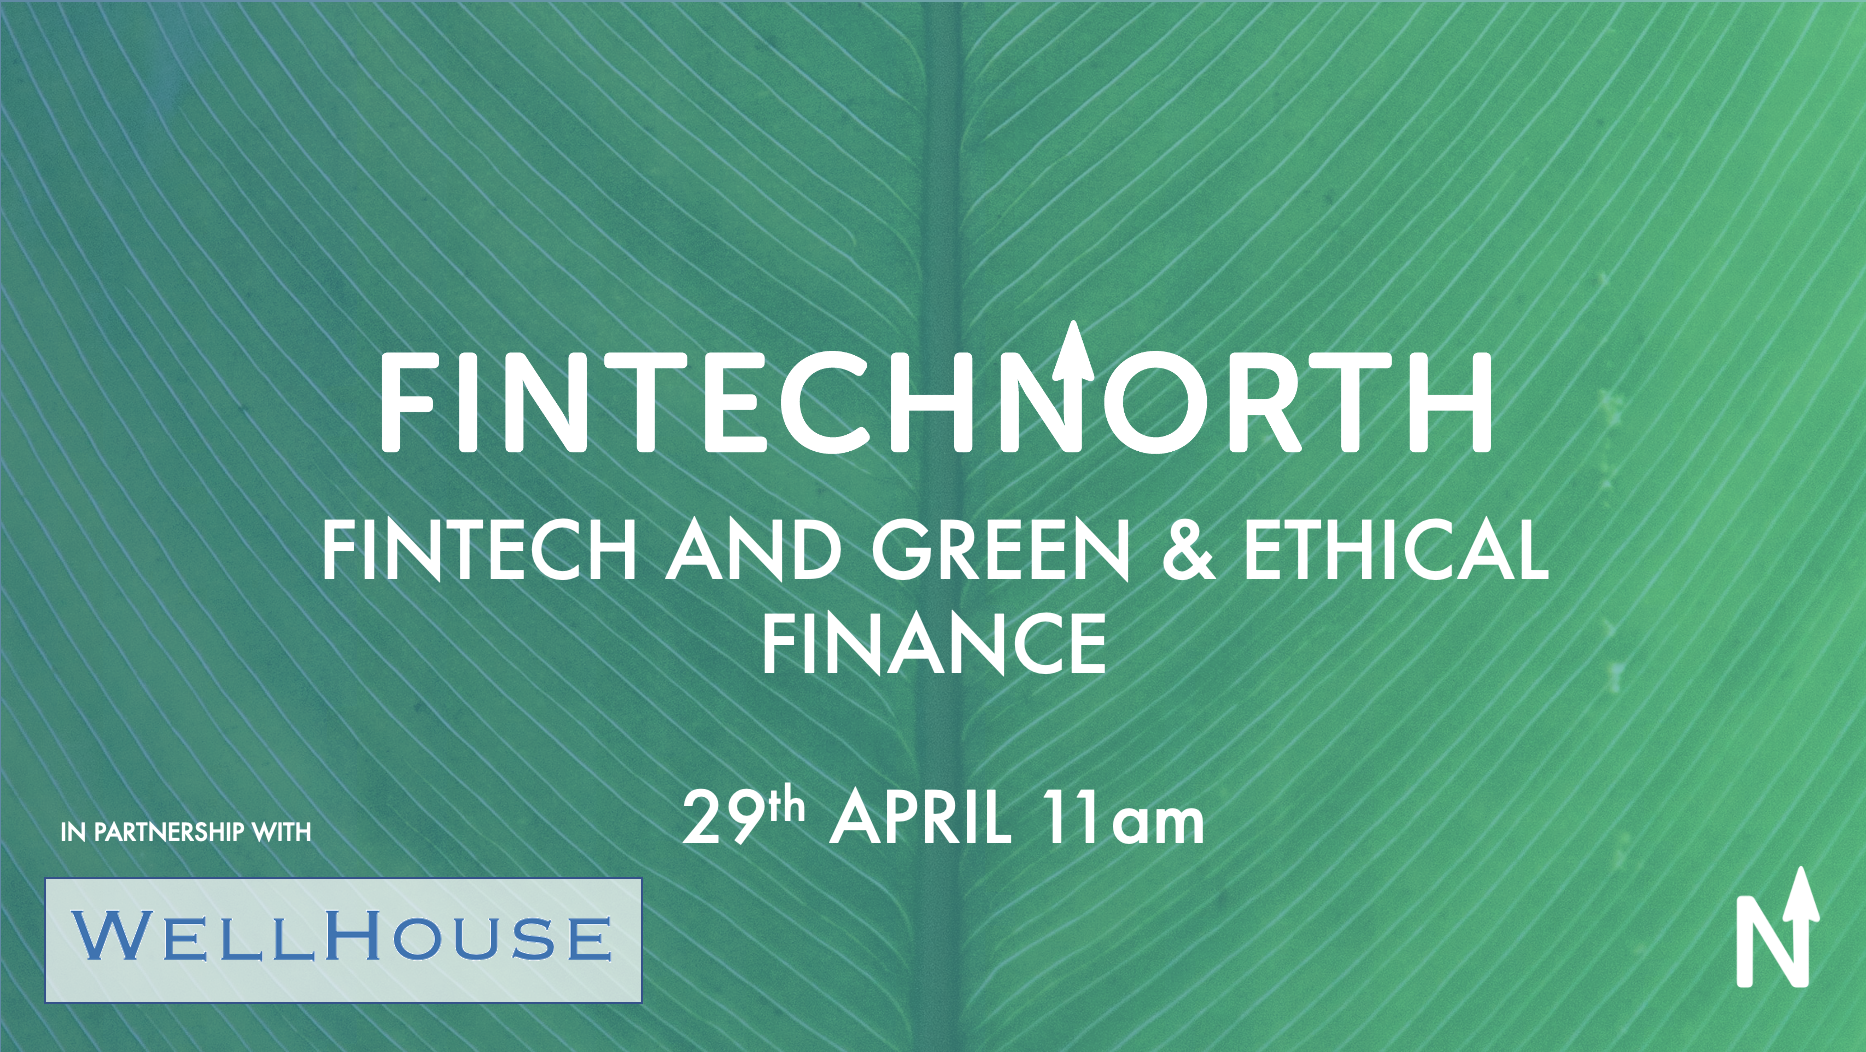 FinTech and Green & Ethical Finance